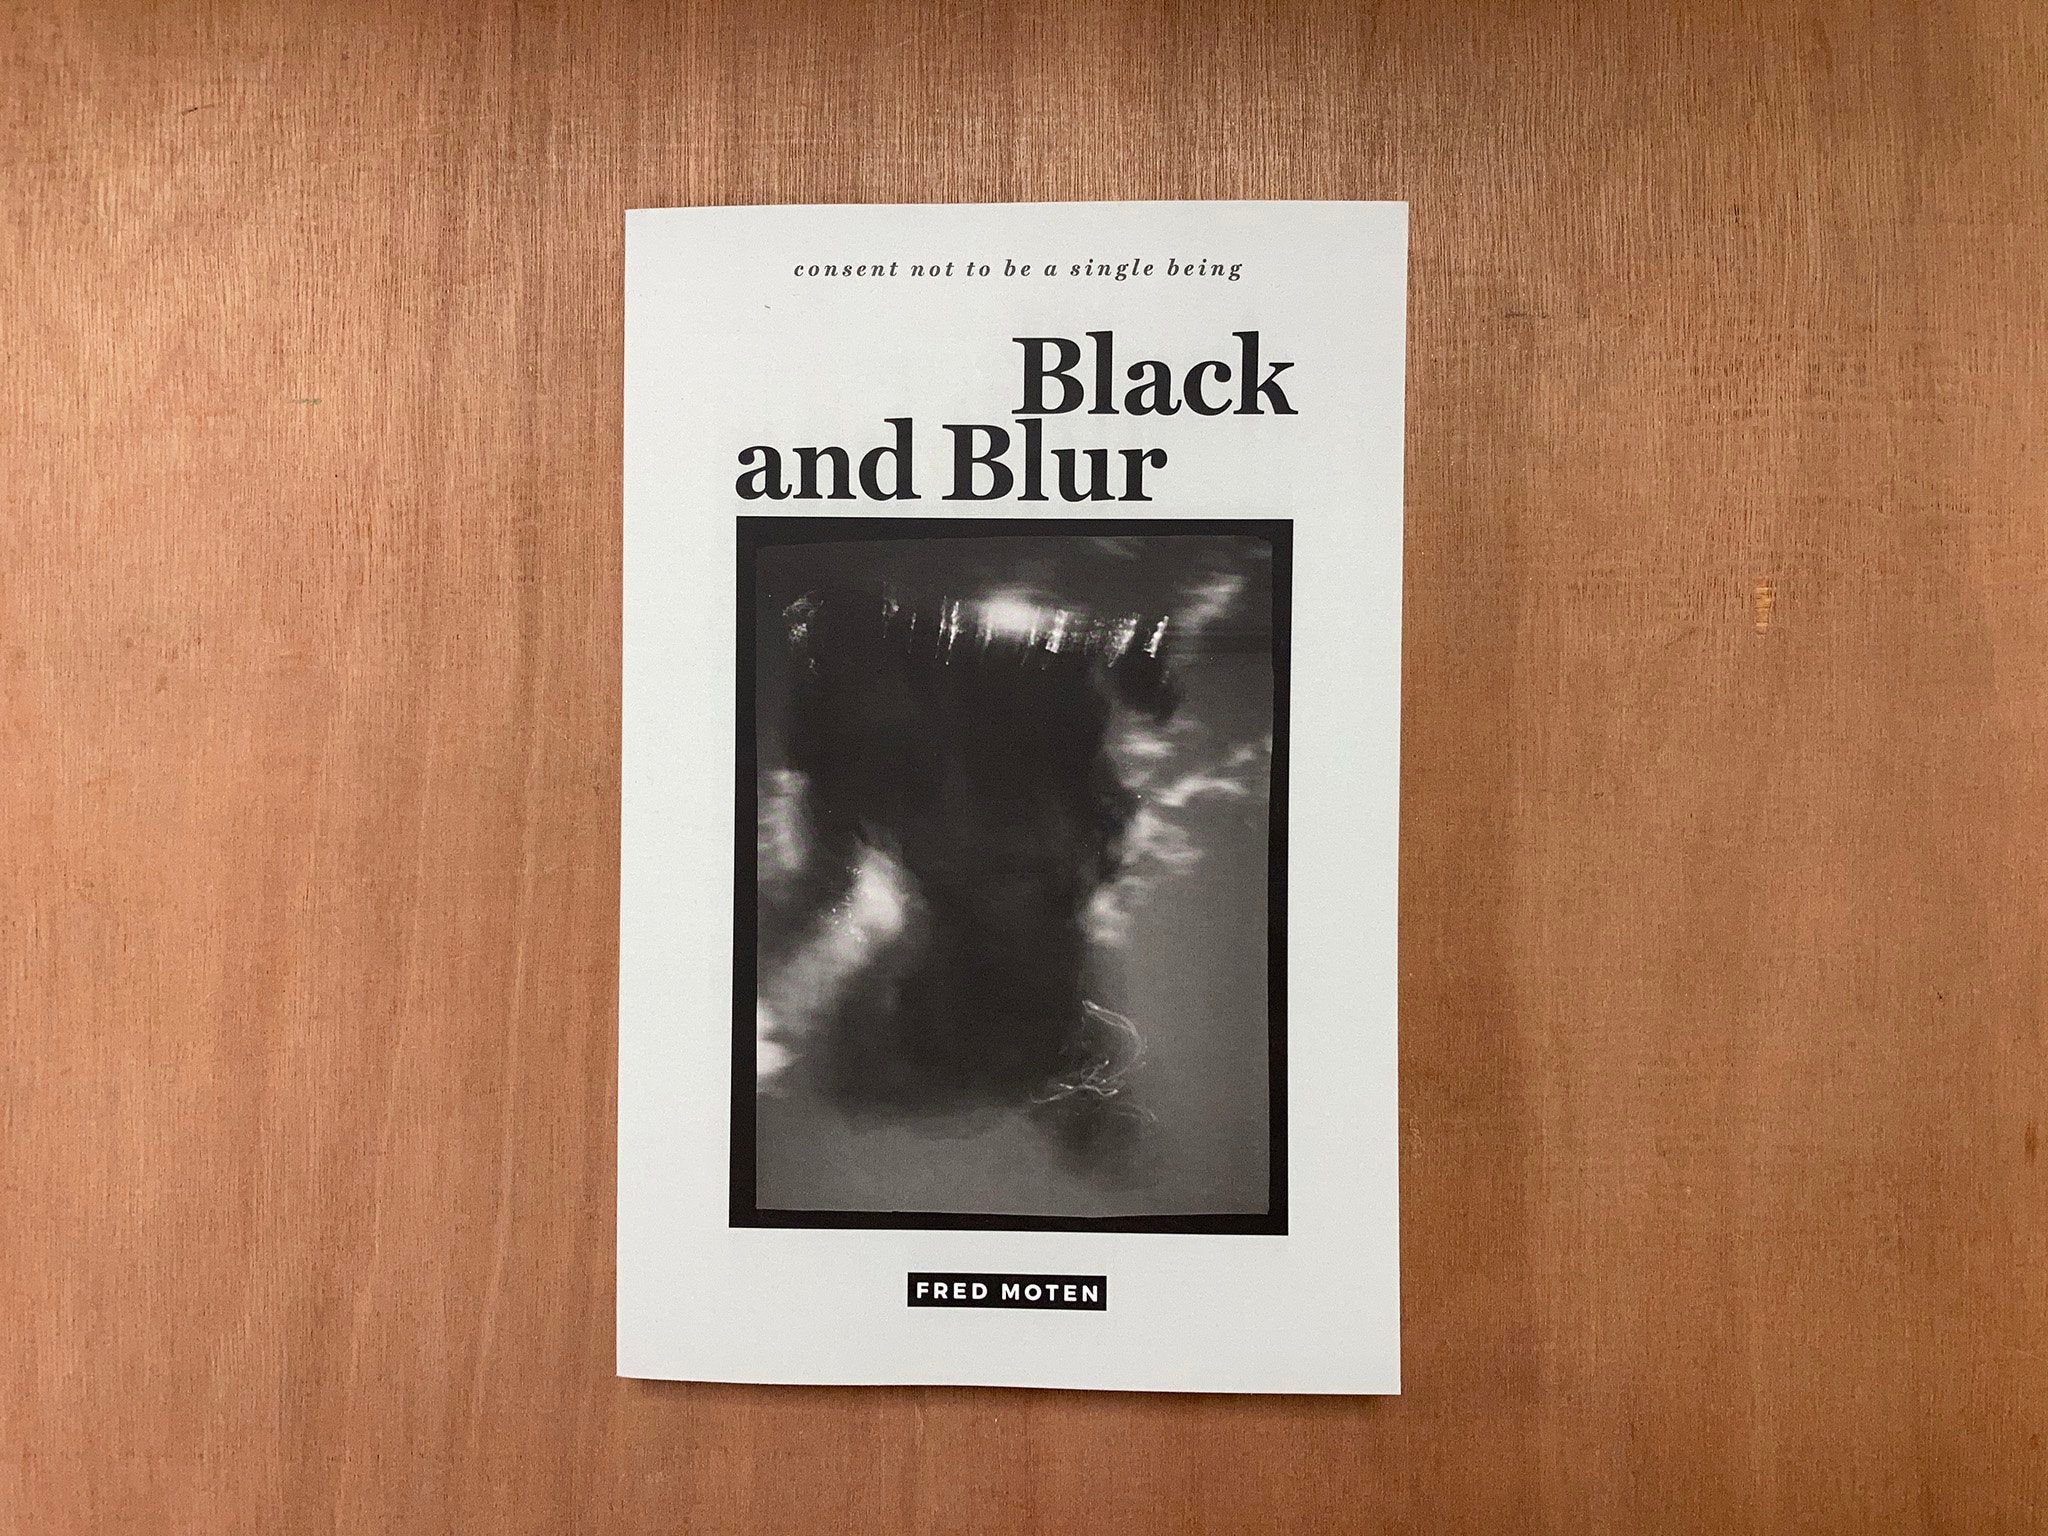 BLACK AND BLUR by Fred Moten